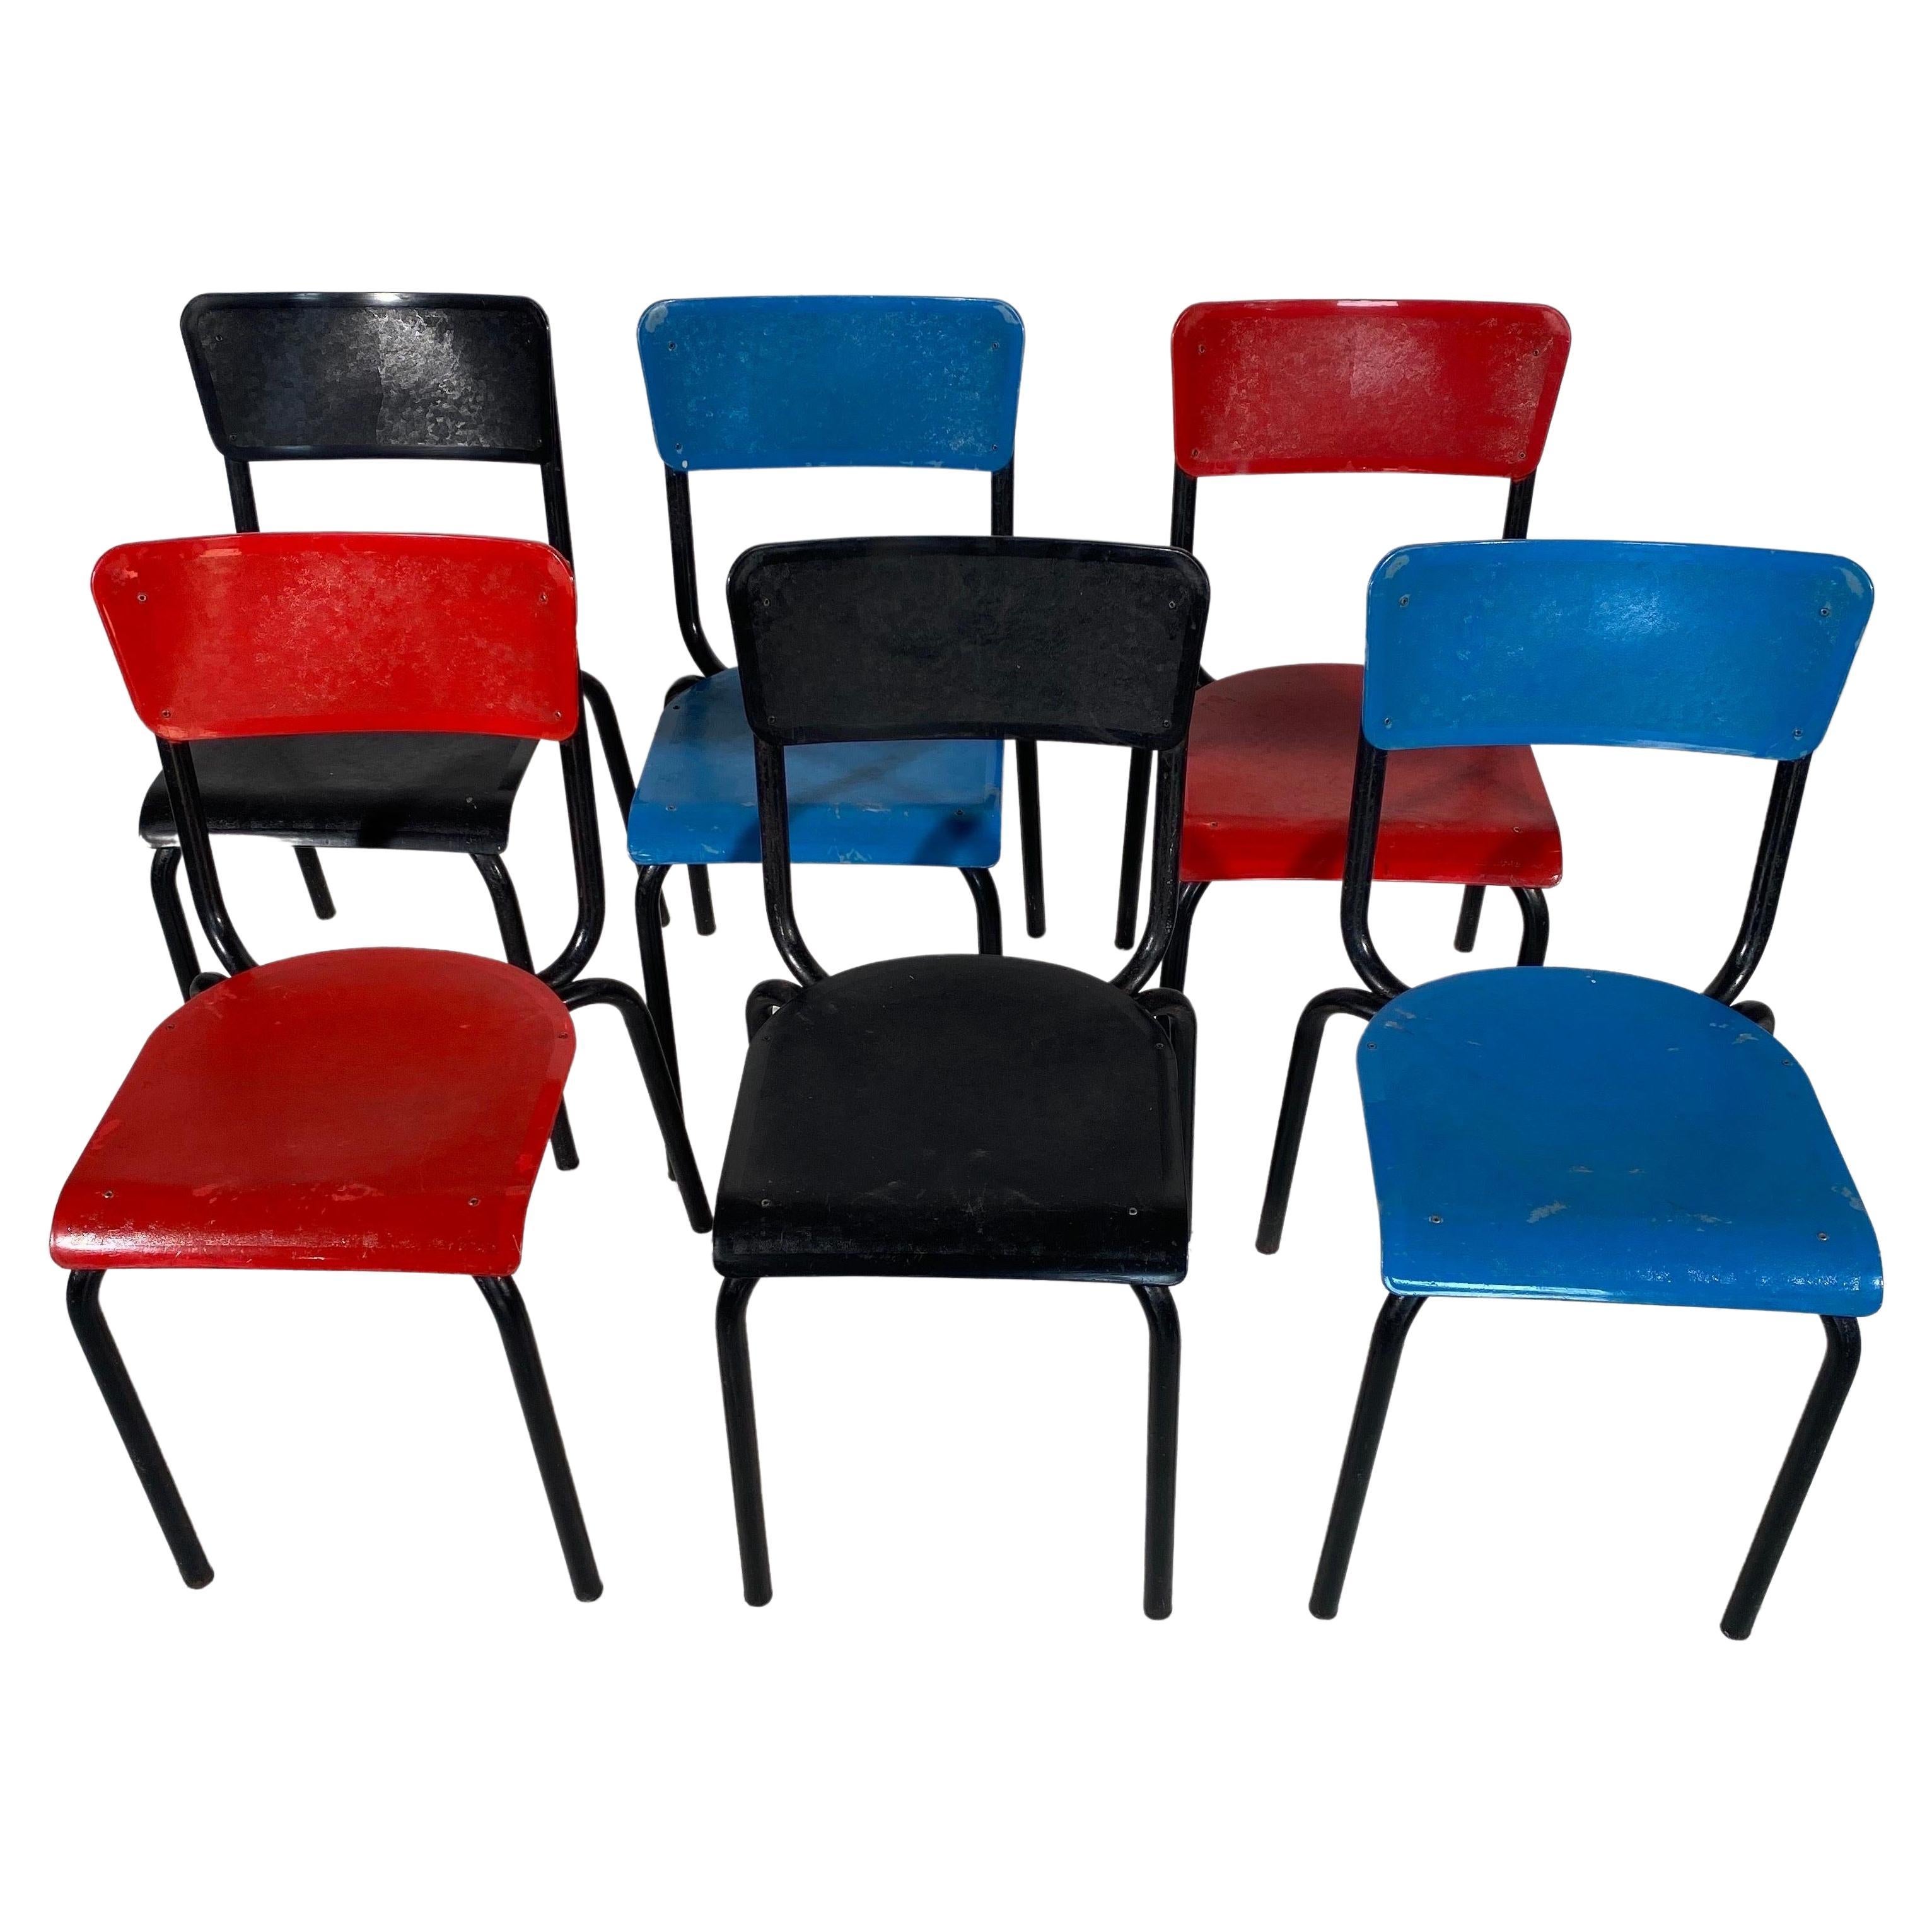 A set of six stackable chairs for the dining room, in a lovely Belgian design. They have a black lacquered metal structure and plastic seats and backs two in red and two in black and two in blue. This color and their clean design make them versatile